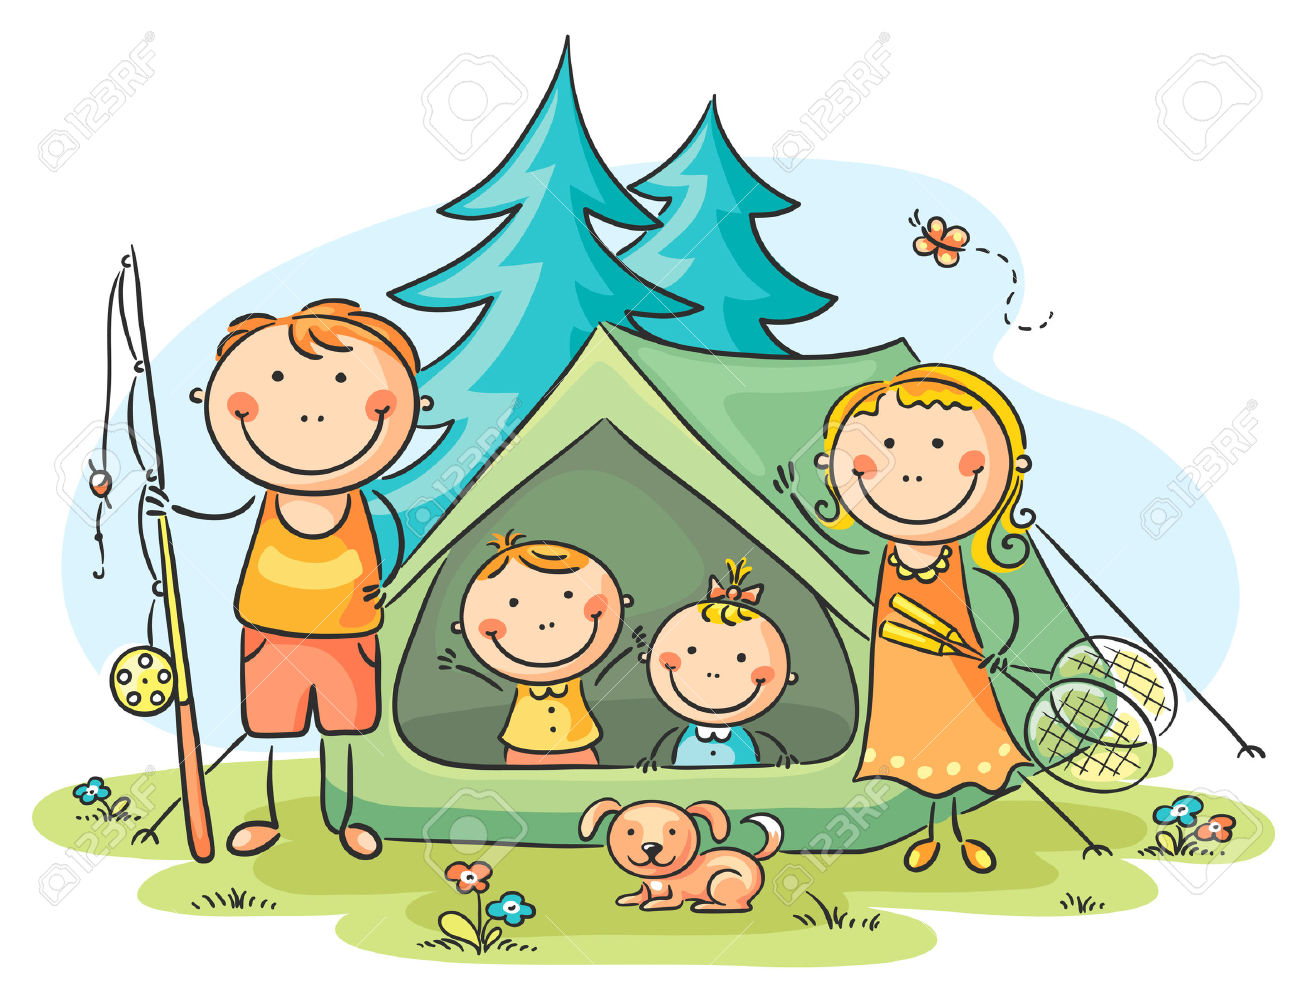 camp clipart family camping